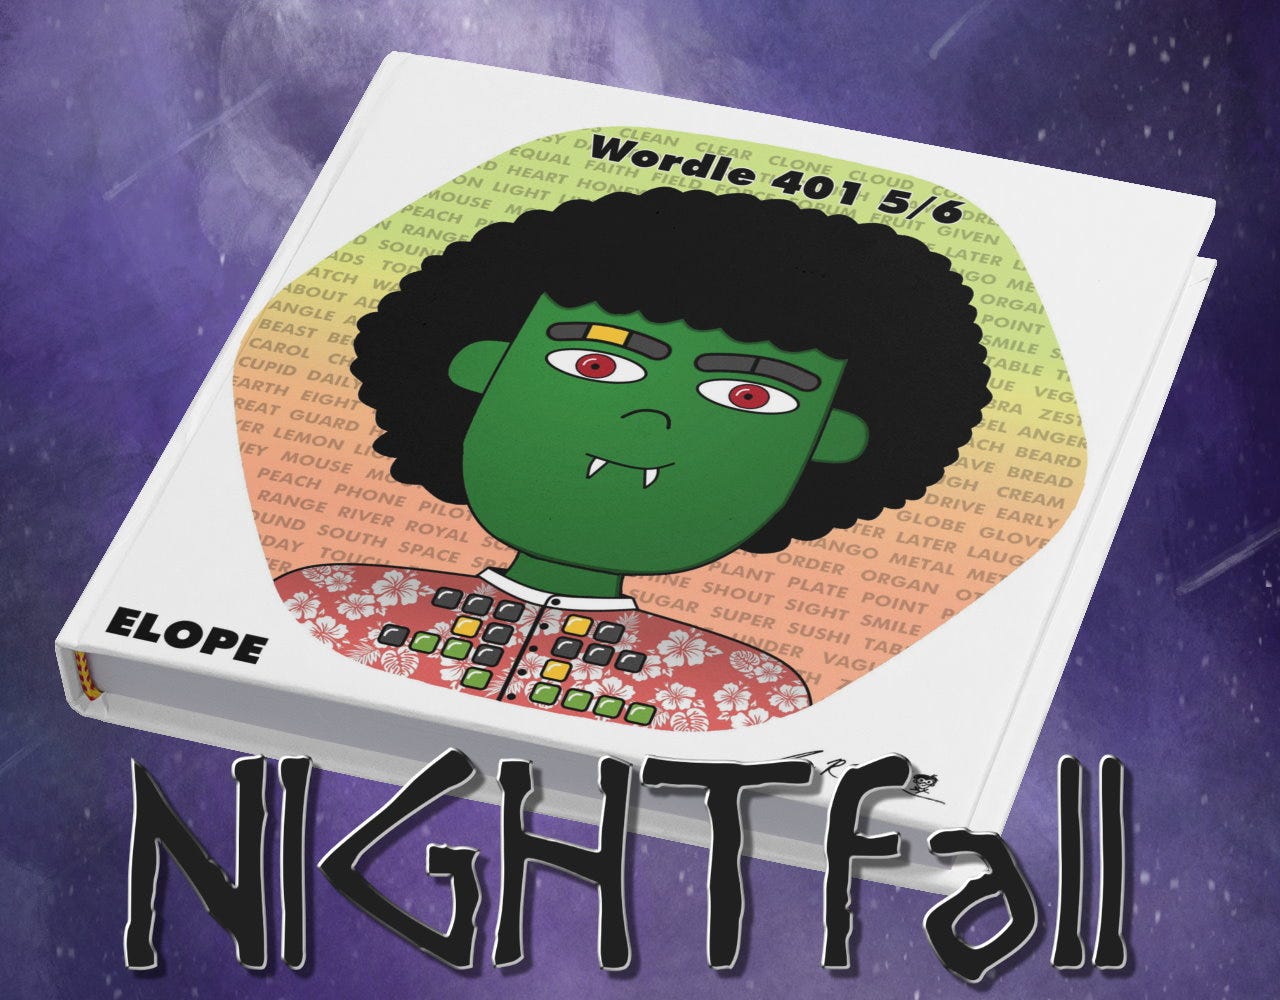 NIGHTfall #9 depicted as a book floating in space behind a NIGHTfall logo.